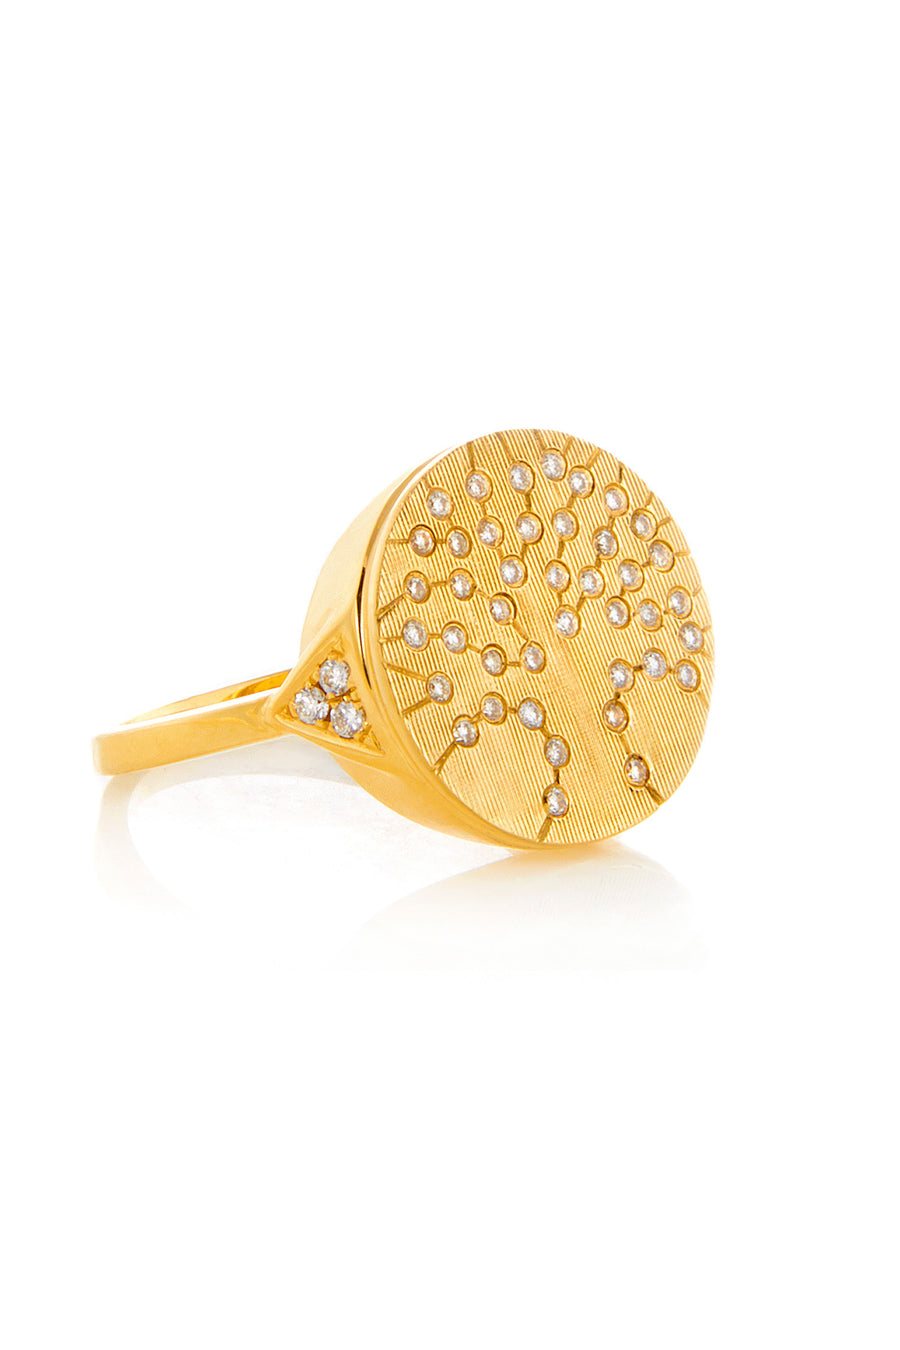 Tree of Life Signet Ring in 18k Yellow Gold | Florentine